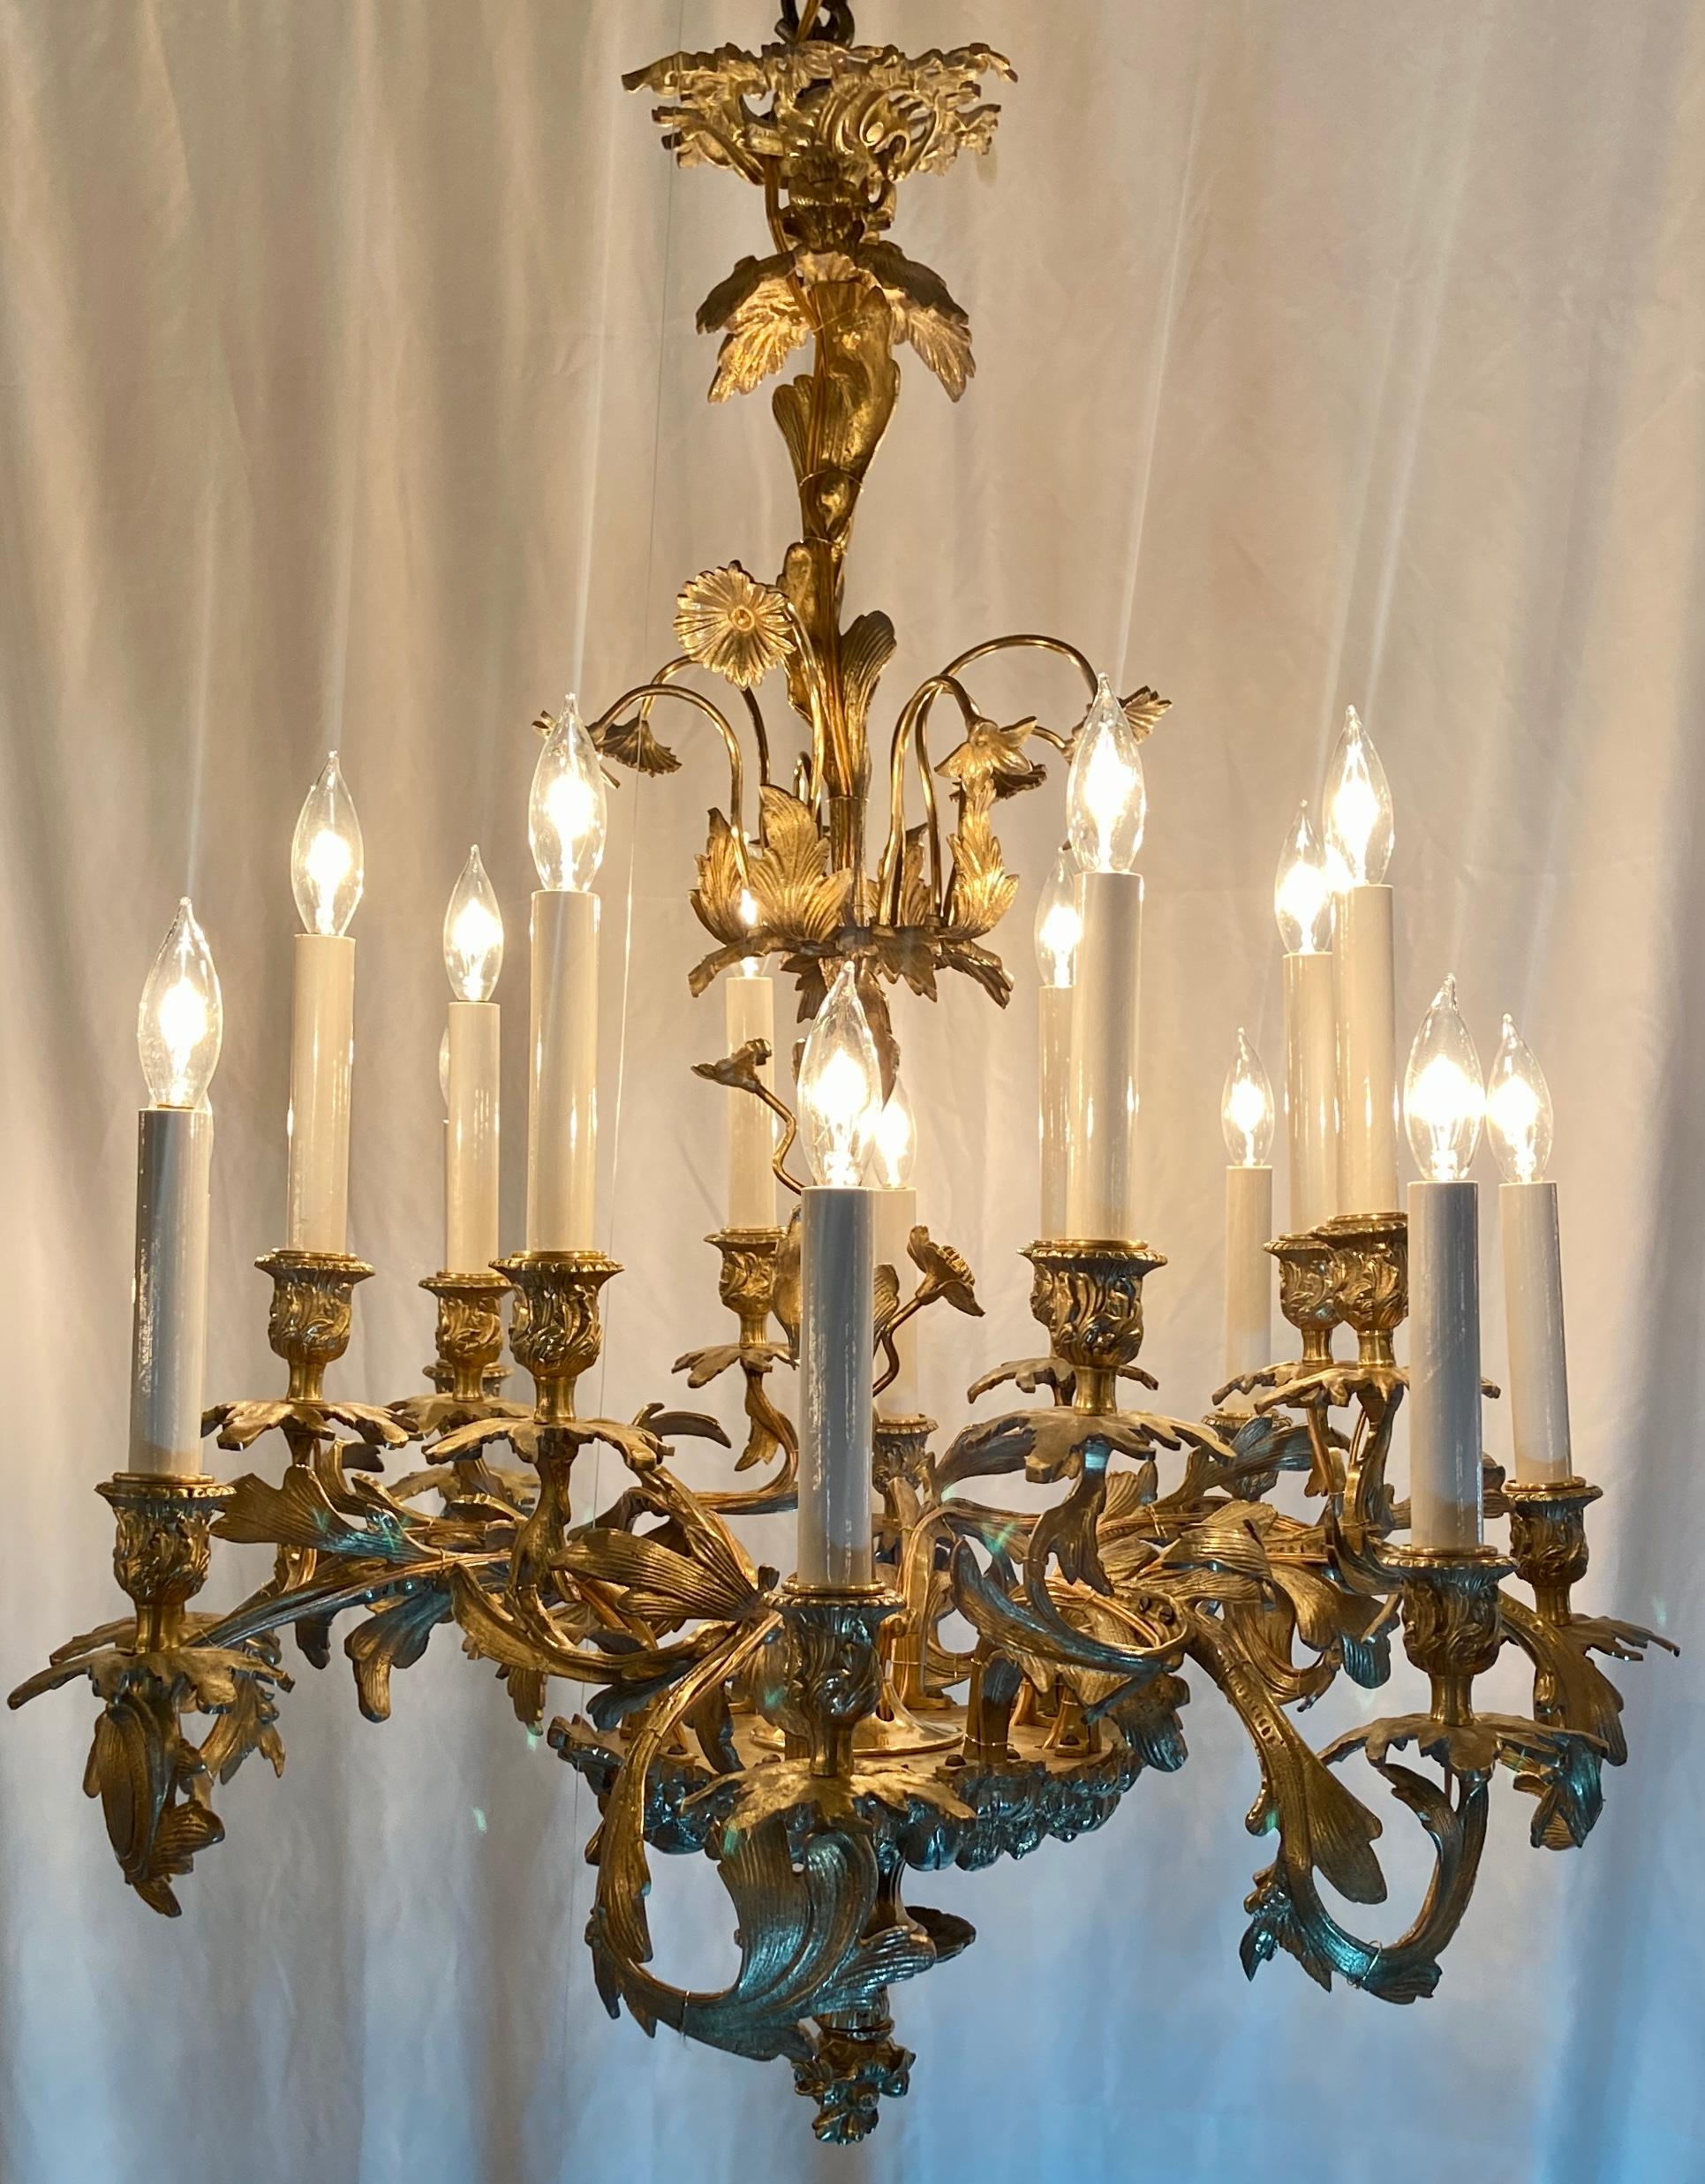 Wonderful Antique French Louis XV style gold bronze 12-light chandelier, circa 1890's.
Delicate Gold Bronze Flowers and Leaves throughout.